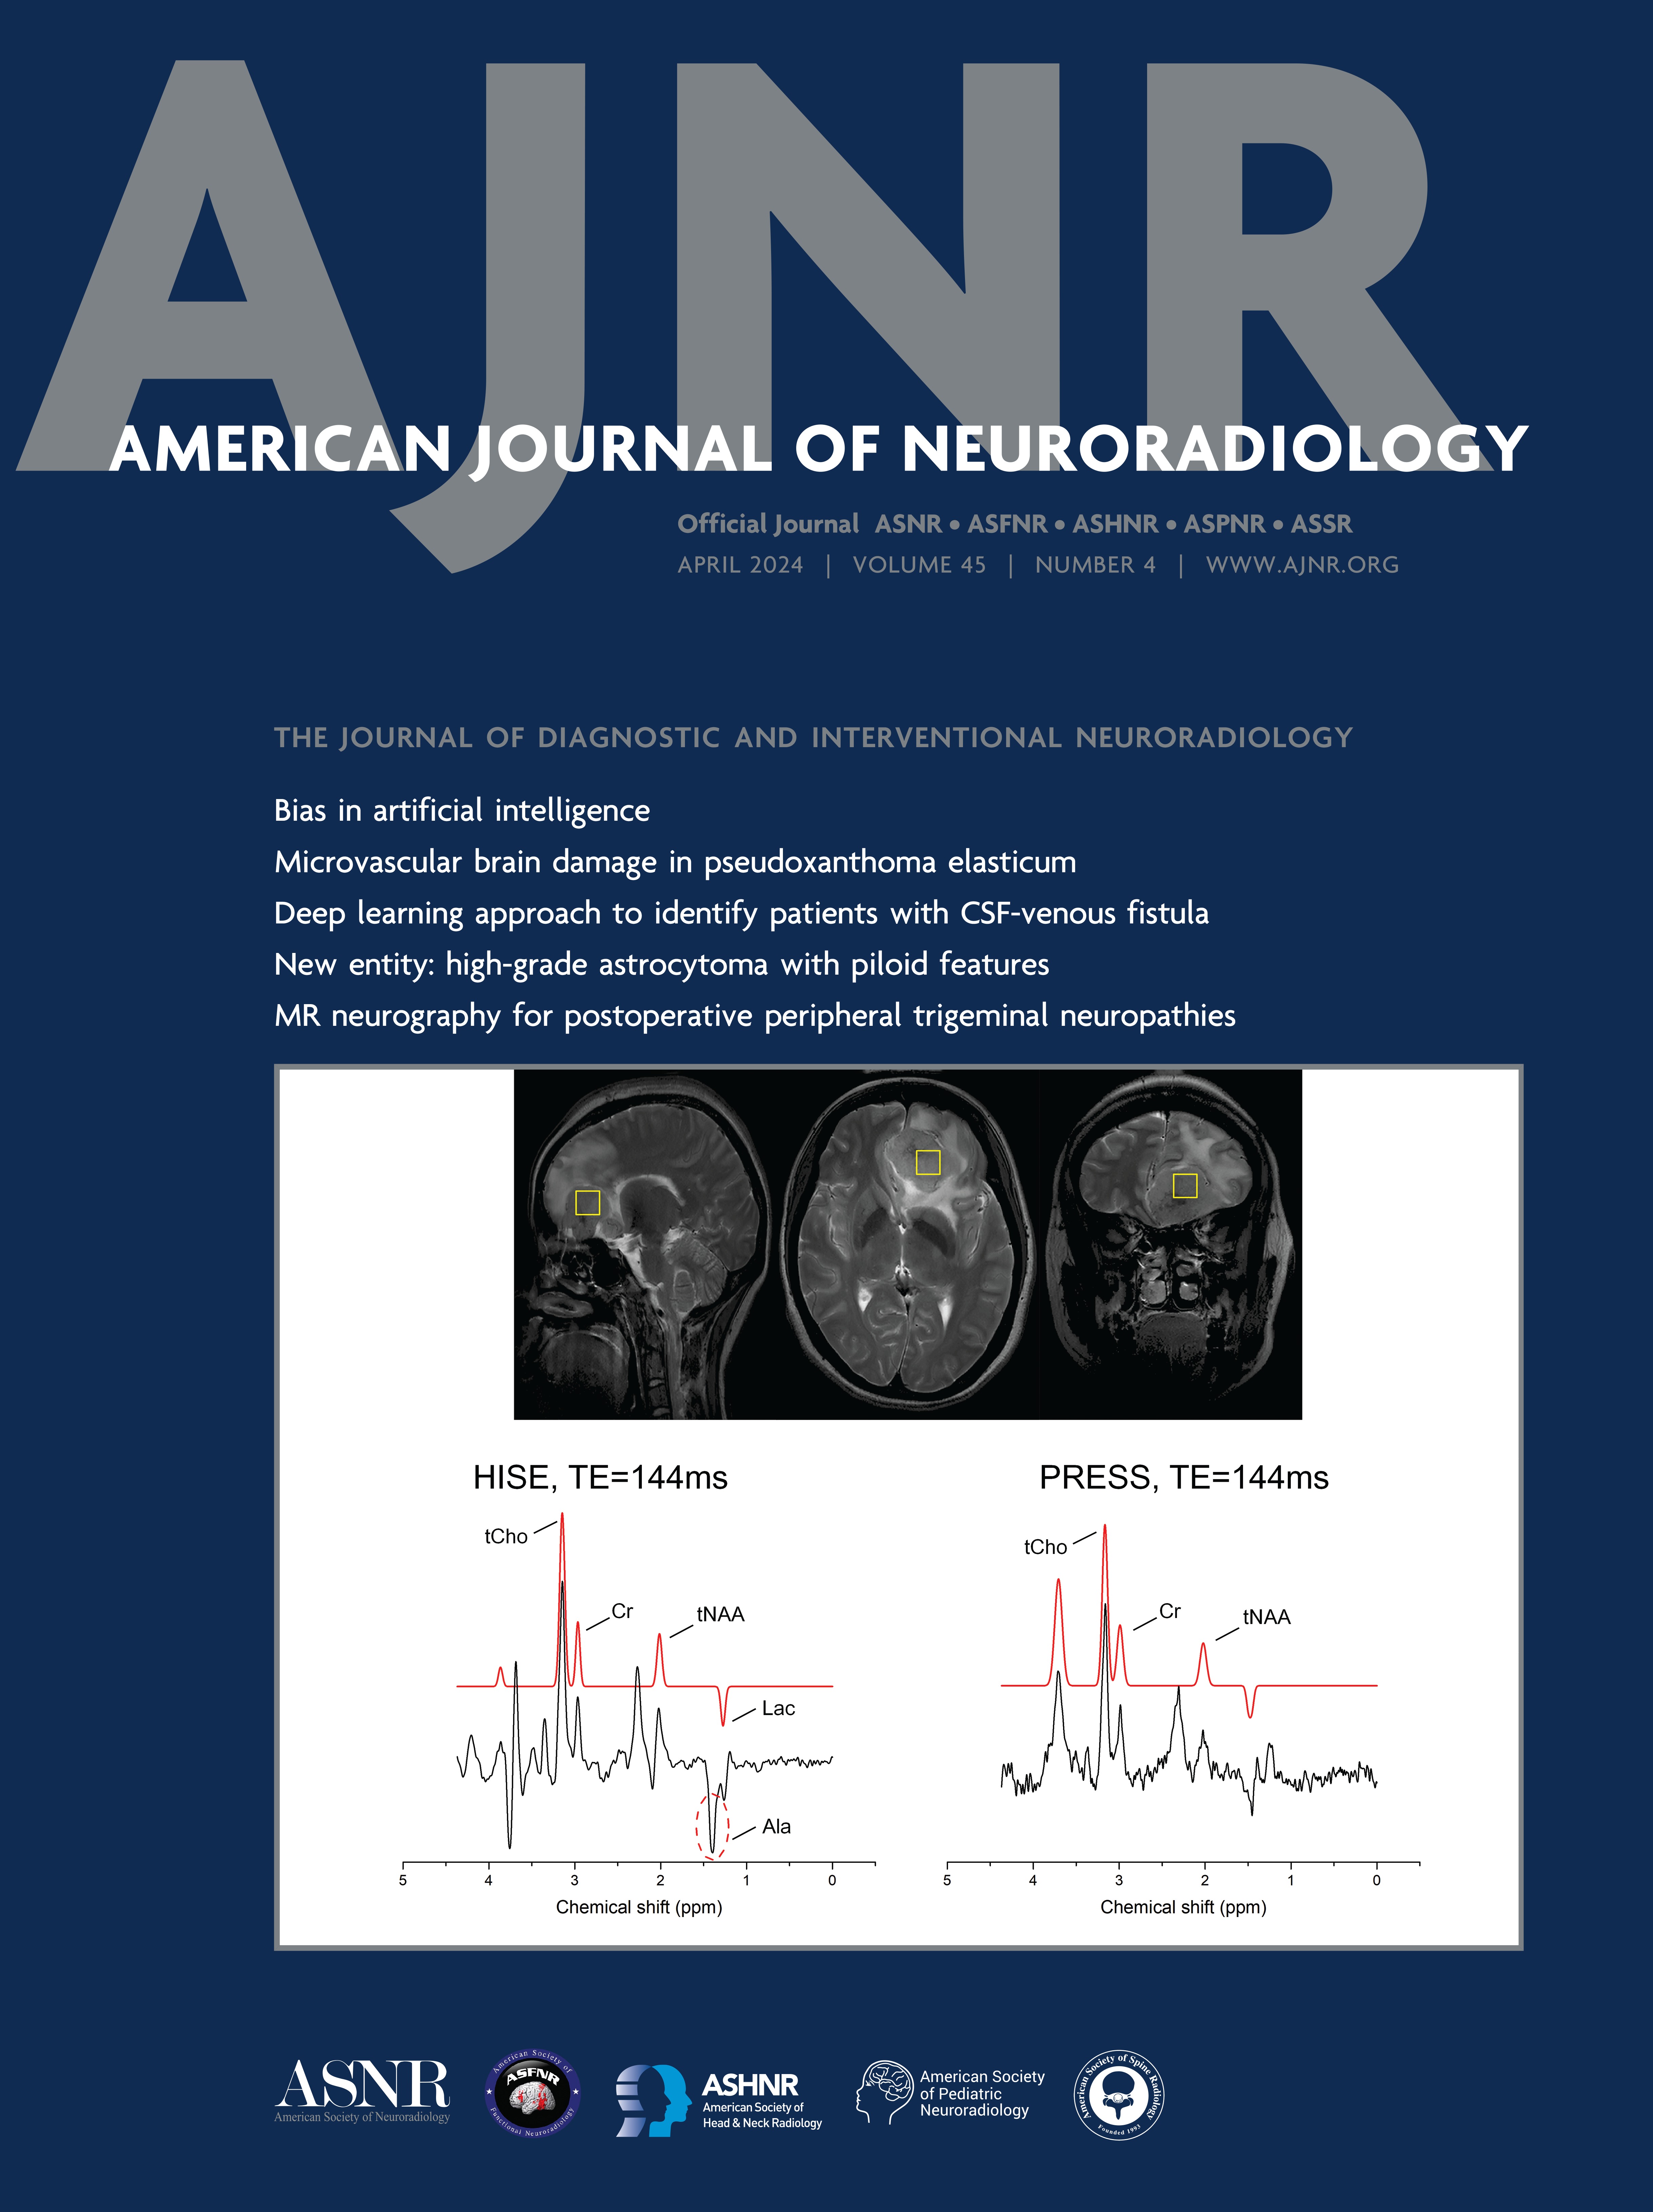 Shift Volume Directly Impacts Neuroradiology Error Rate at a Large Academic Medical Center: The Case for Volume Limits [HEALTH POLICIES/QUALITY IMPROVEMENT/EVIDENCE-BASED NEUROIMAGING]